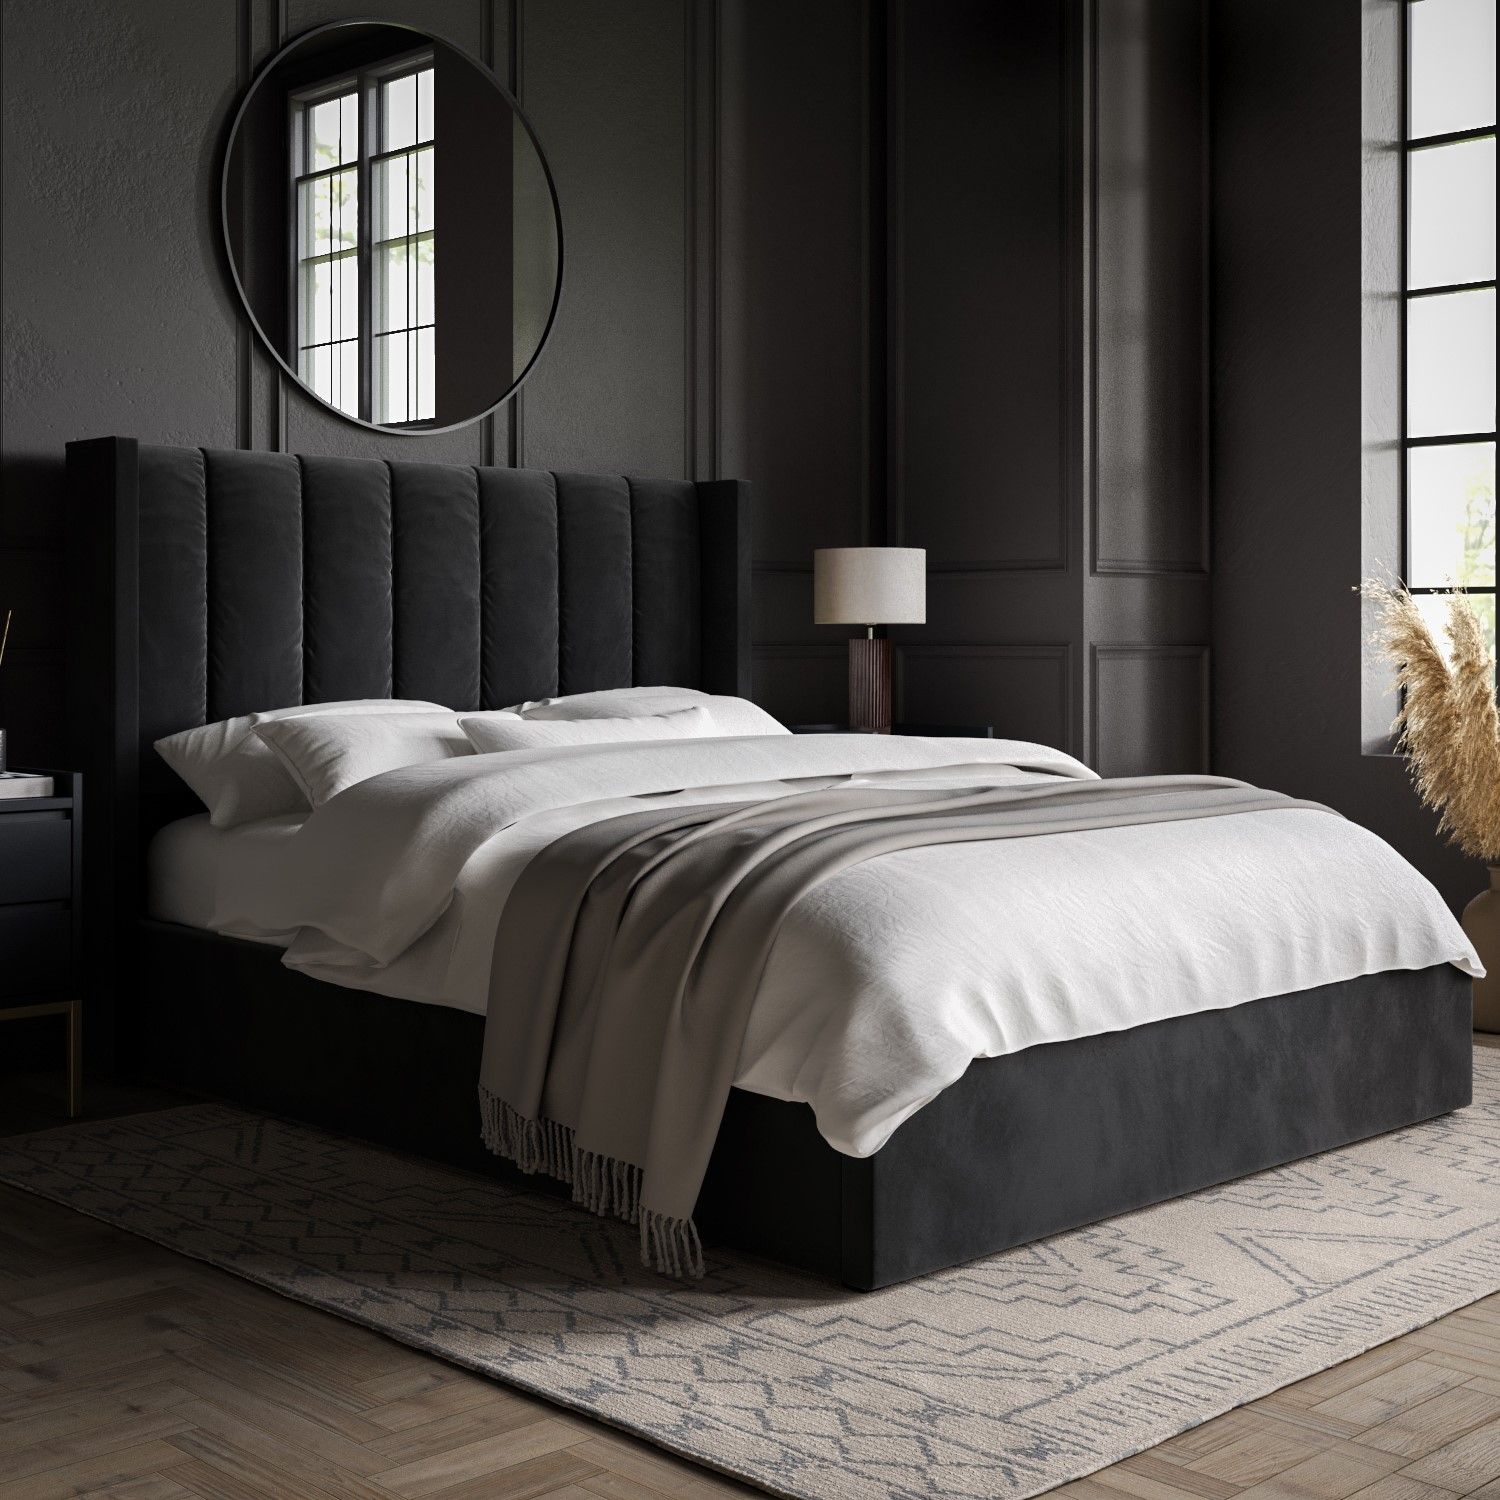 Enhance Your Bedroom with Double Bed Headboards: A Stylish and Functional Addition